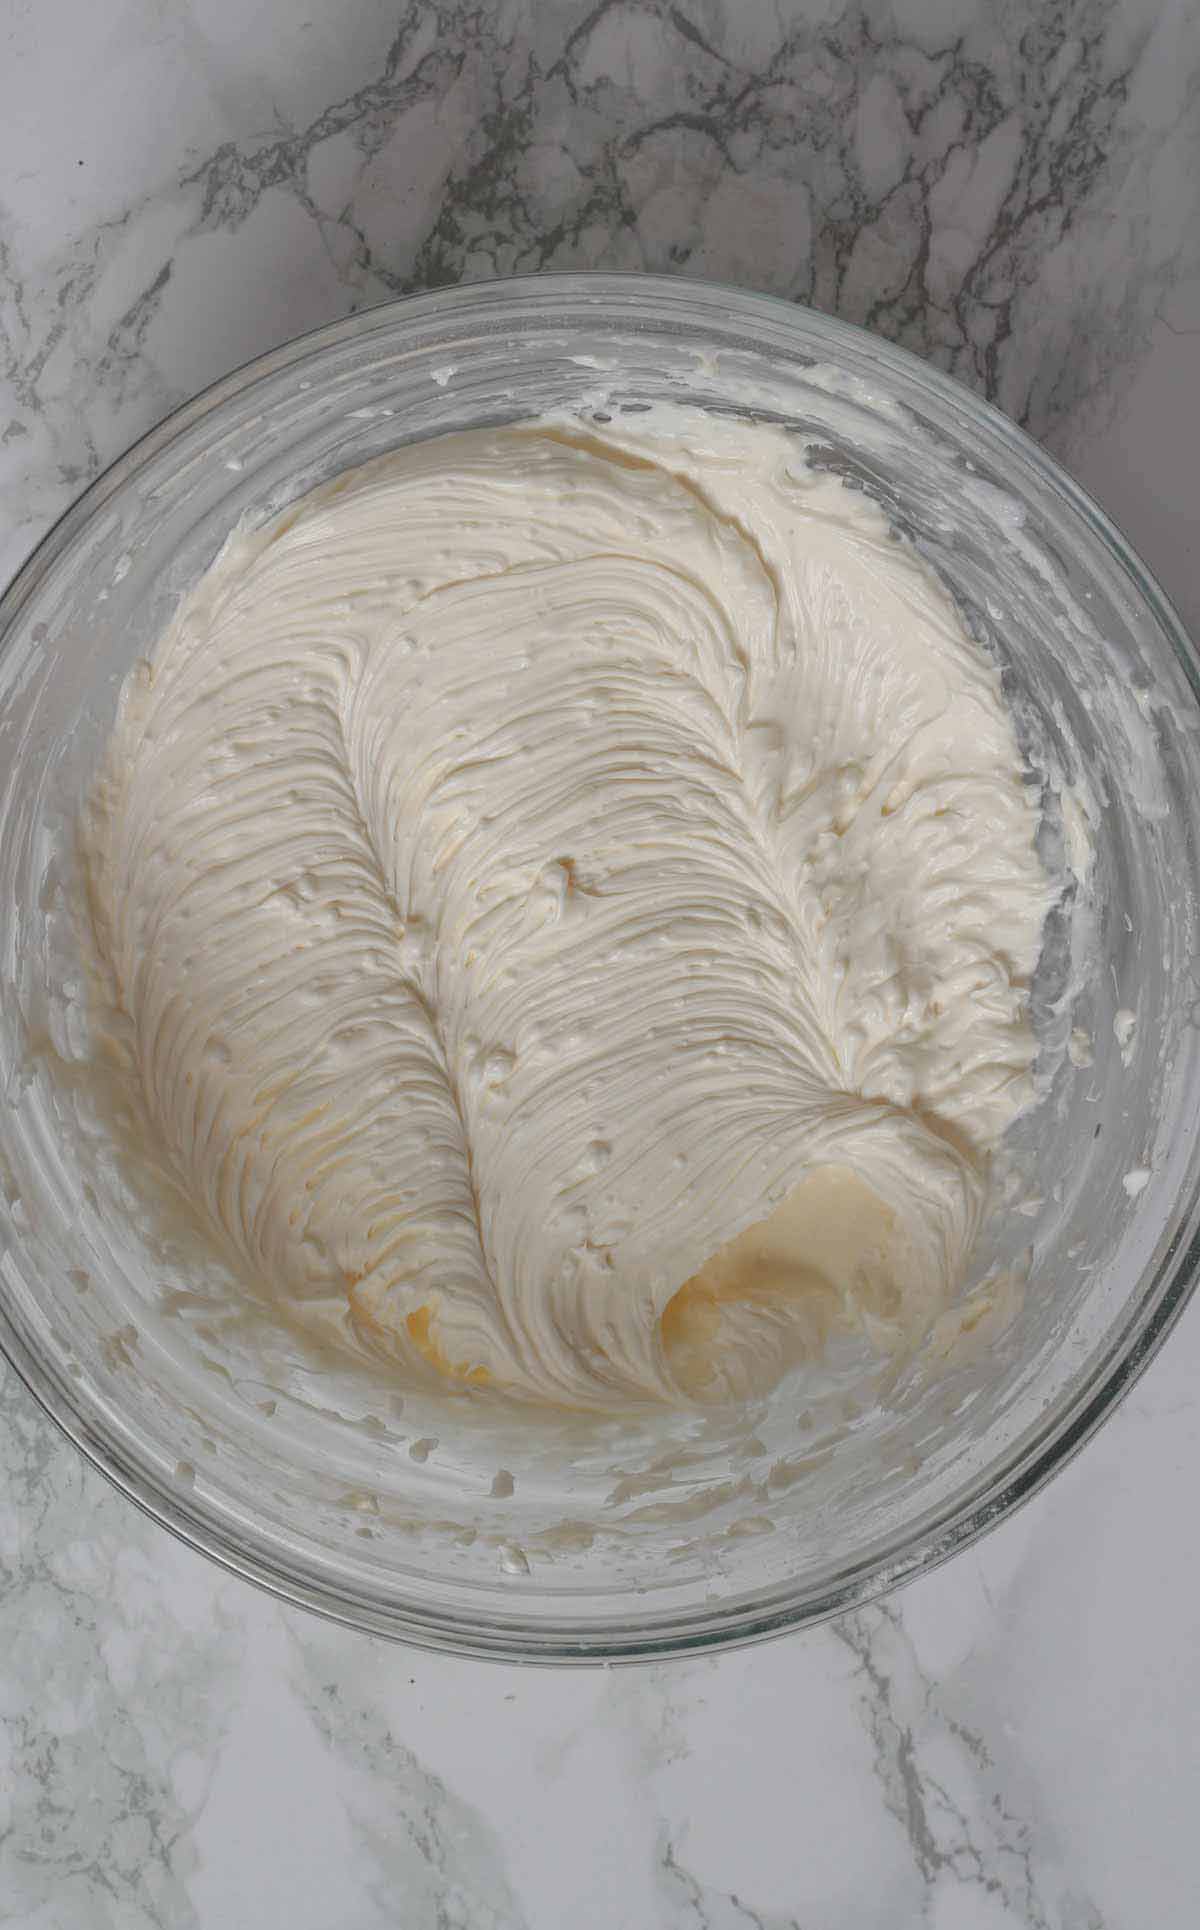 Whipped Creamy Filling